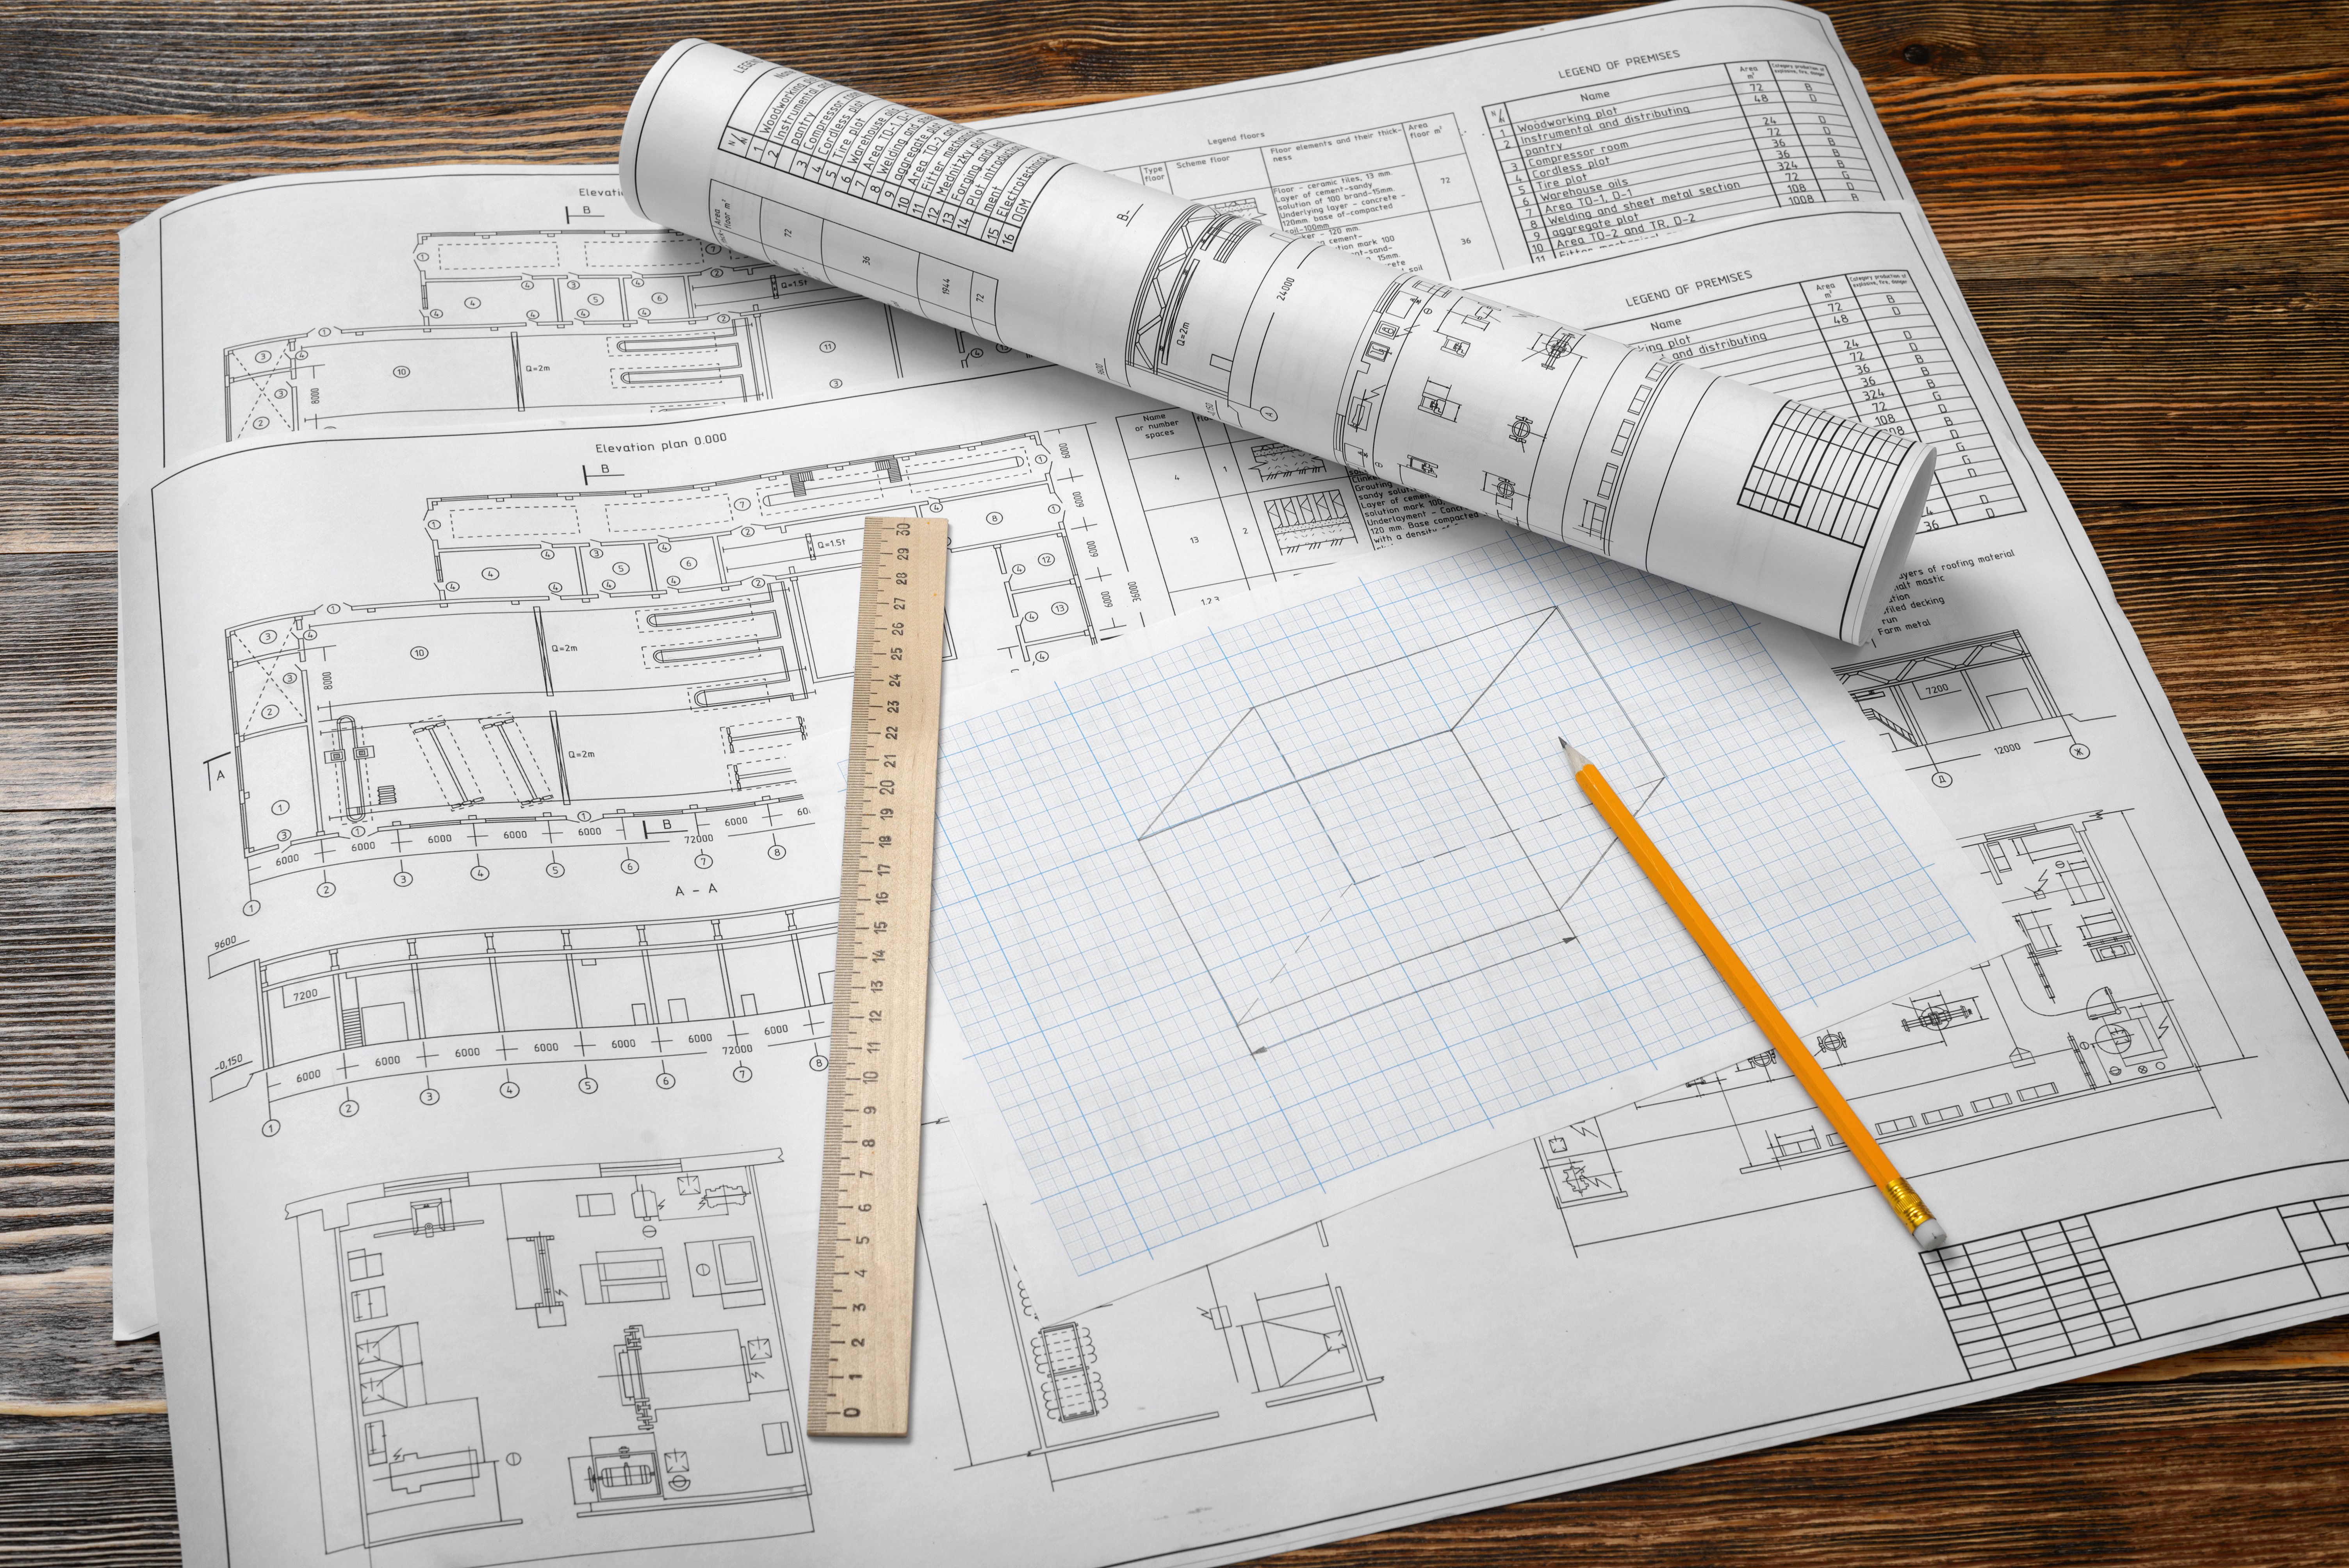 adobe stock image of business plans planning permission with ruler and pencil and drawing